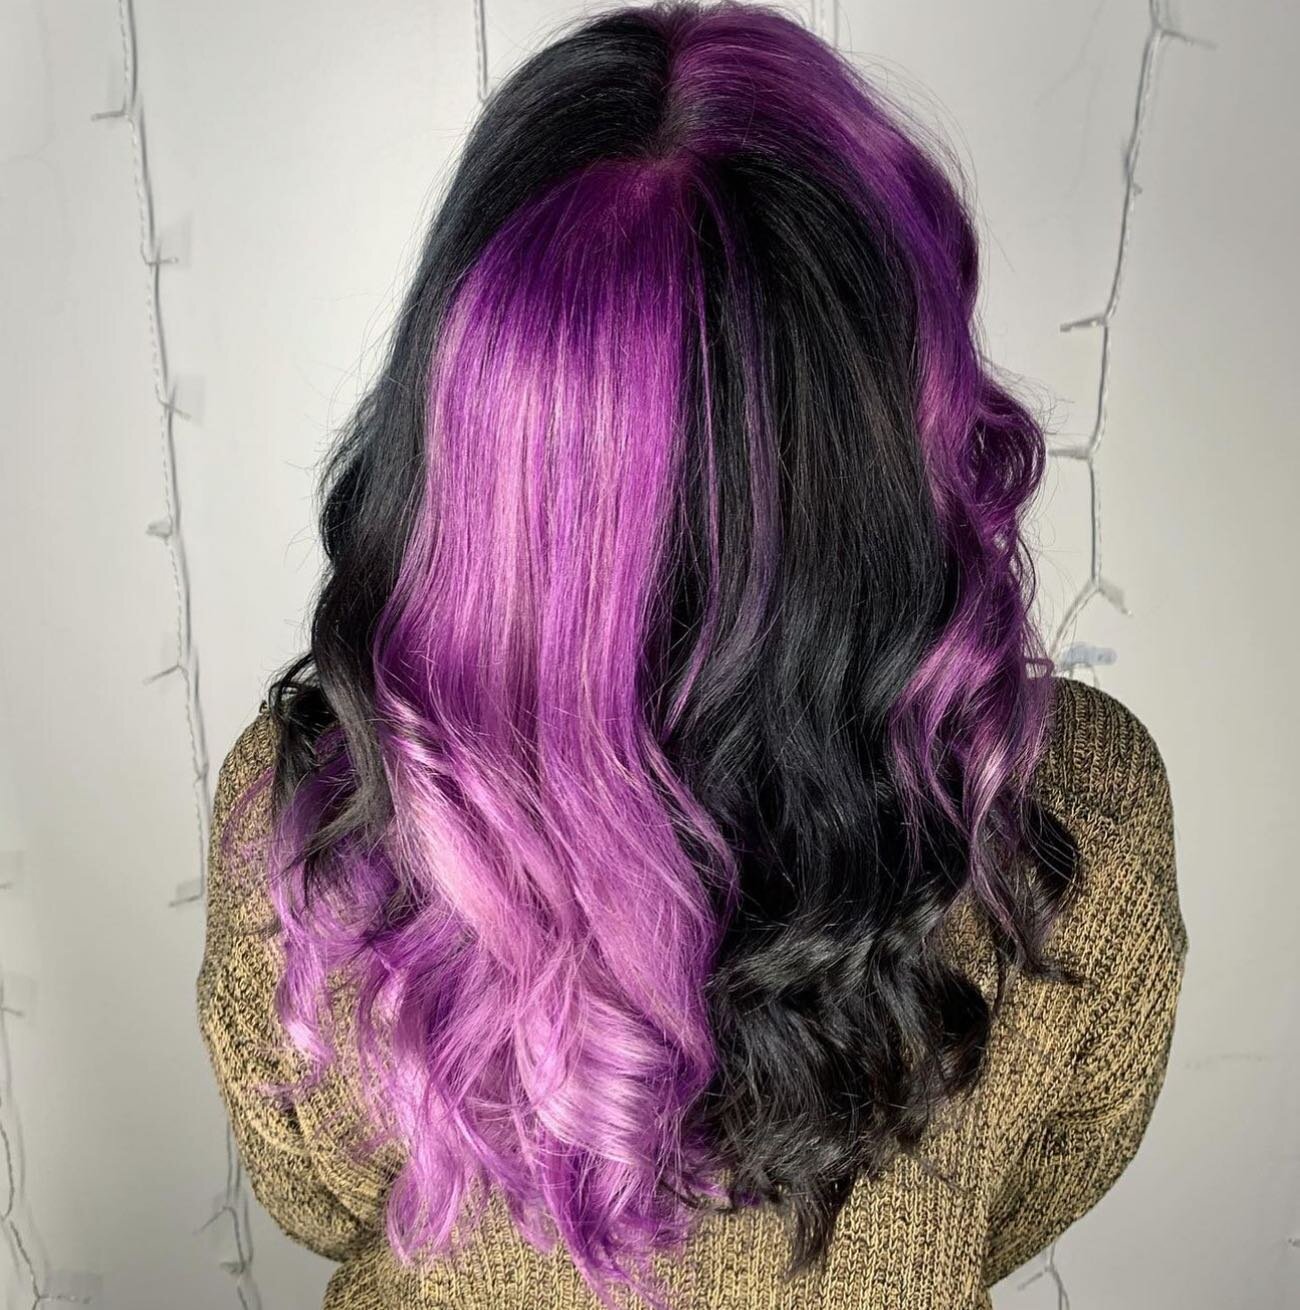 Loving this color combo by Tiana!